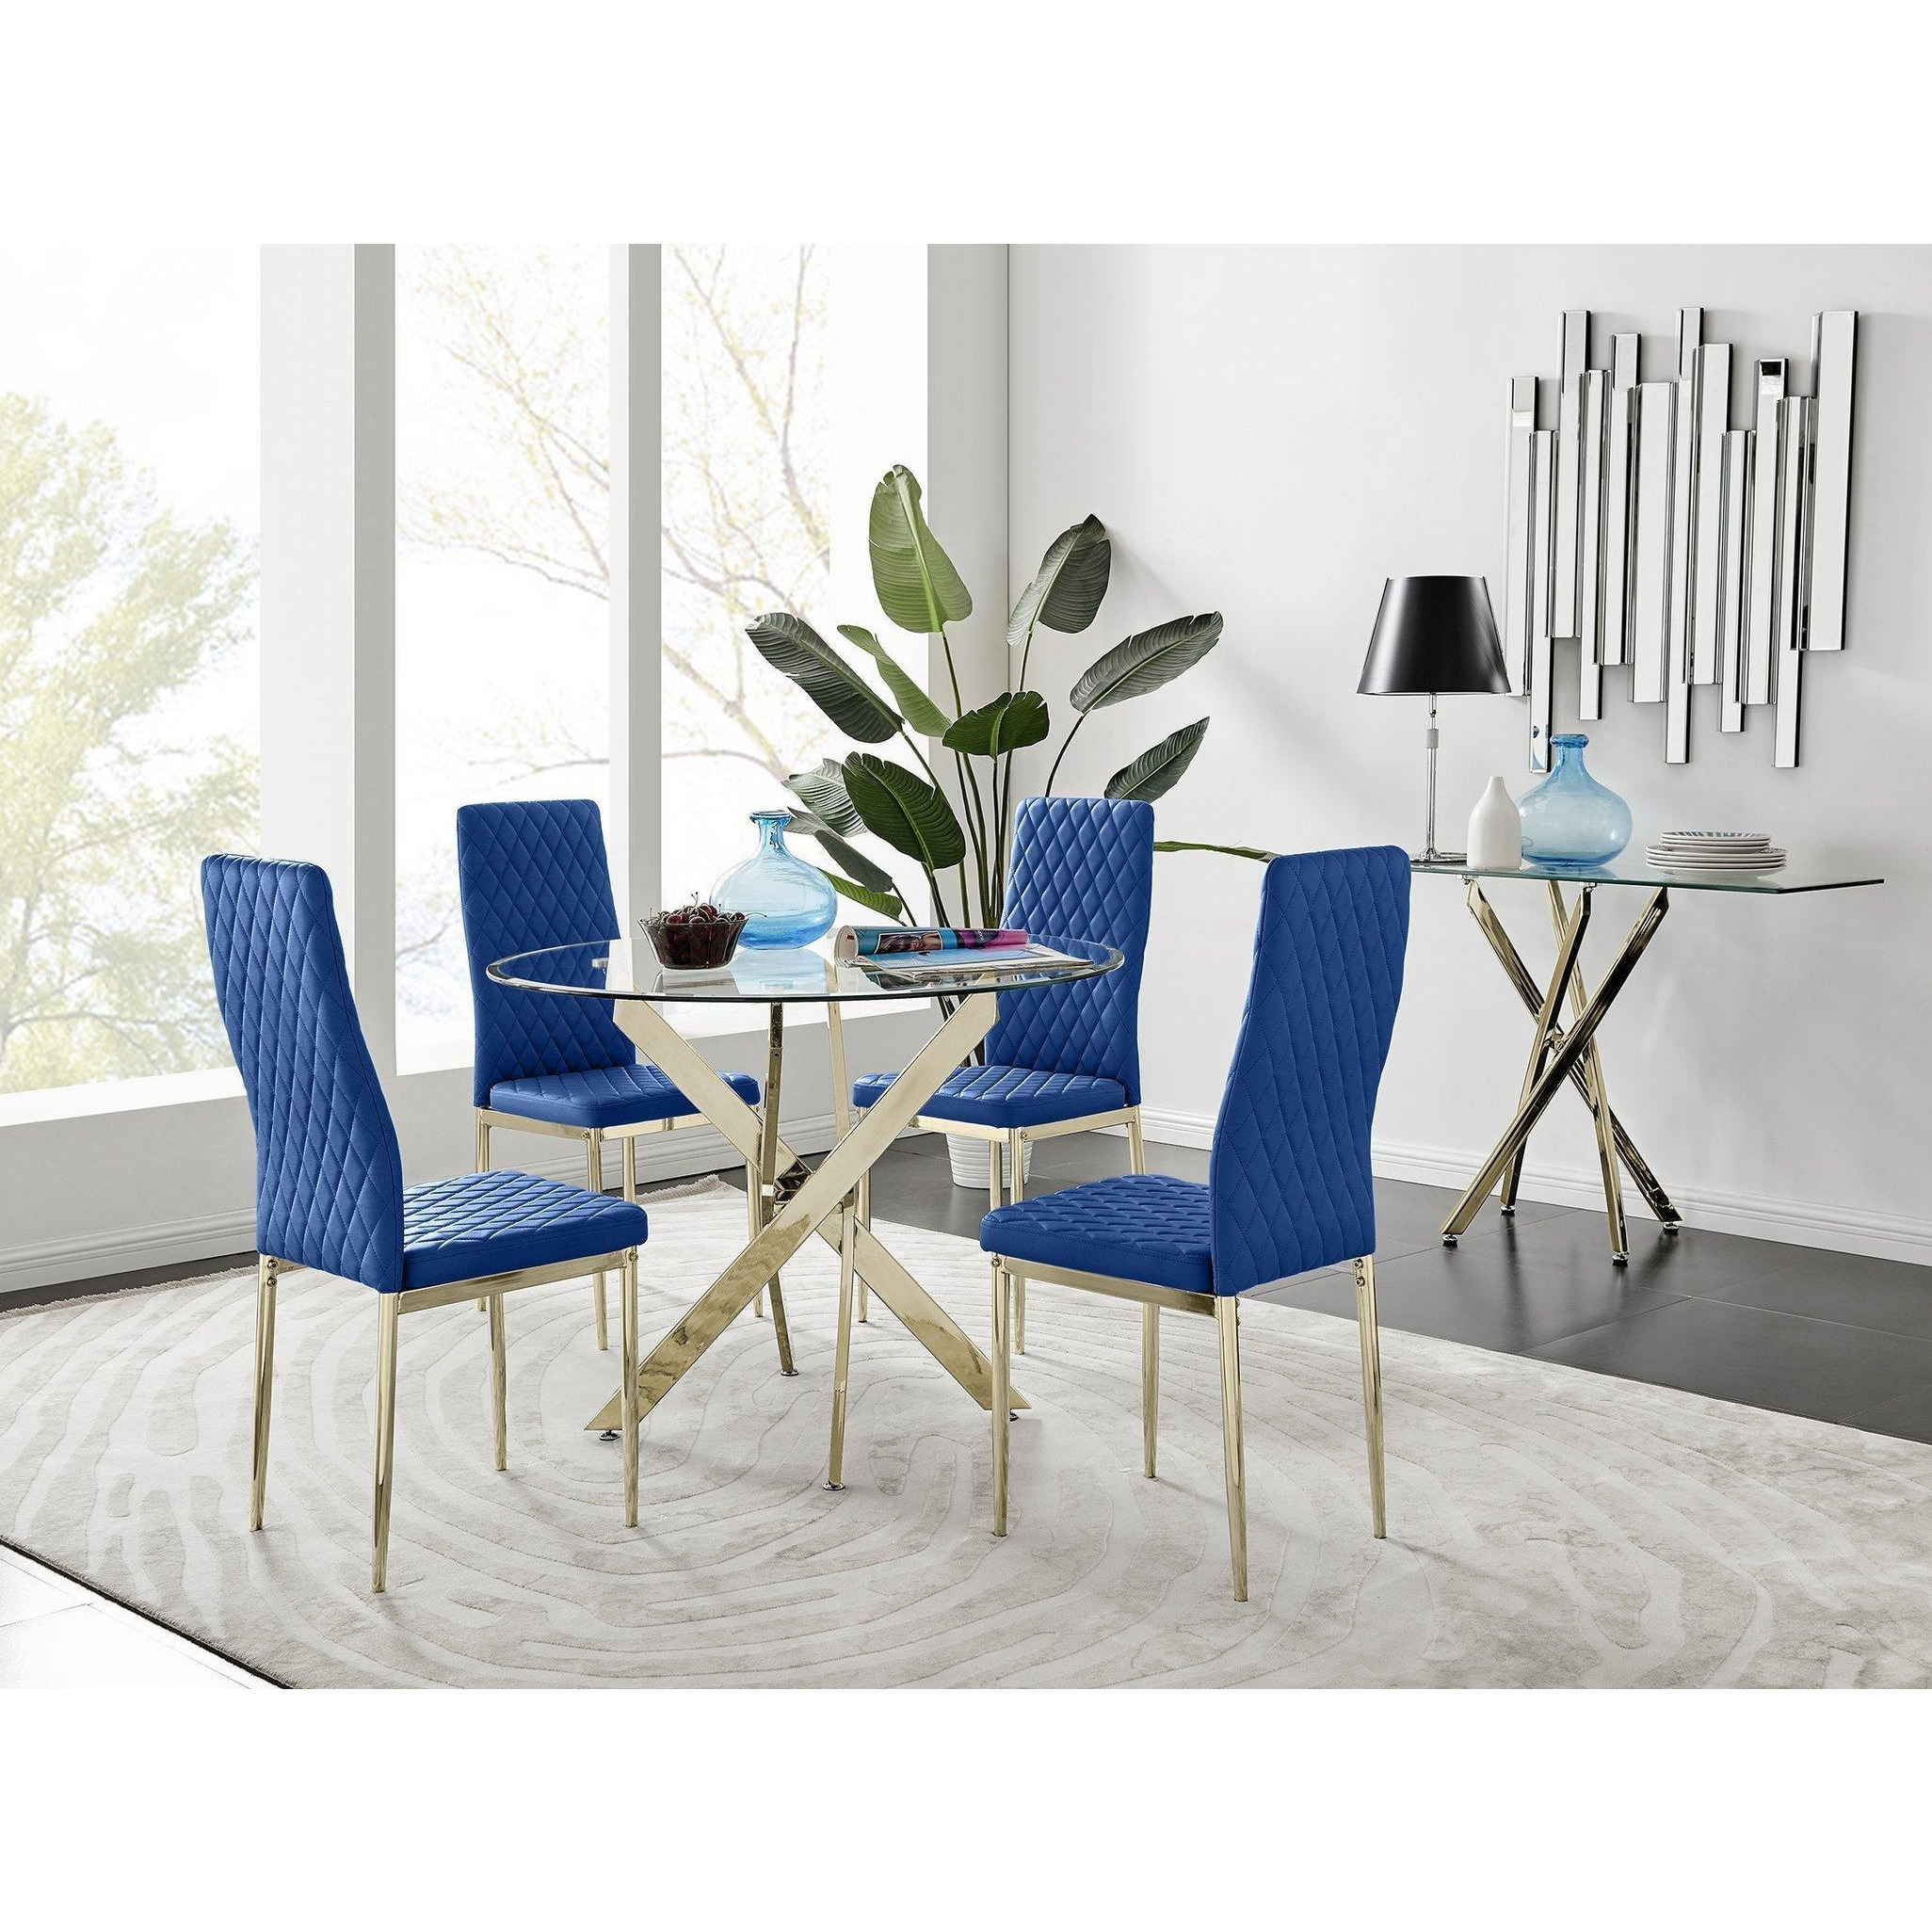 Novara 100cm Round Tempered Glass Dining Table with Gold Legs & 4 Milan Velvet Chairs - image 1